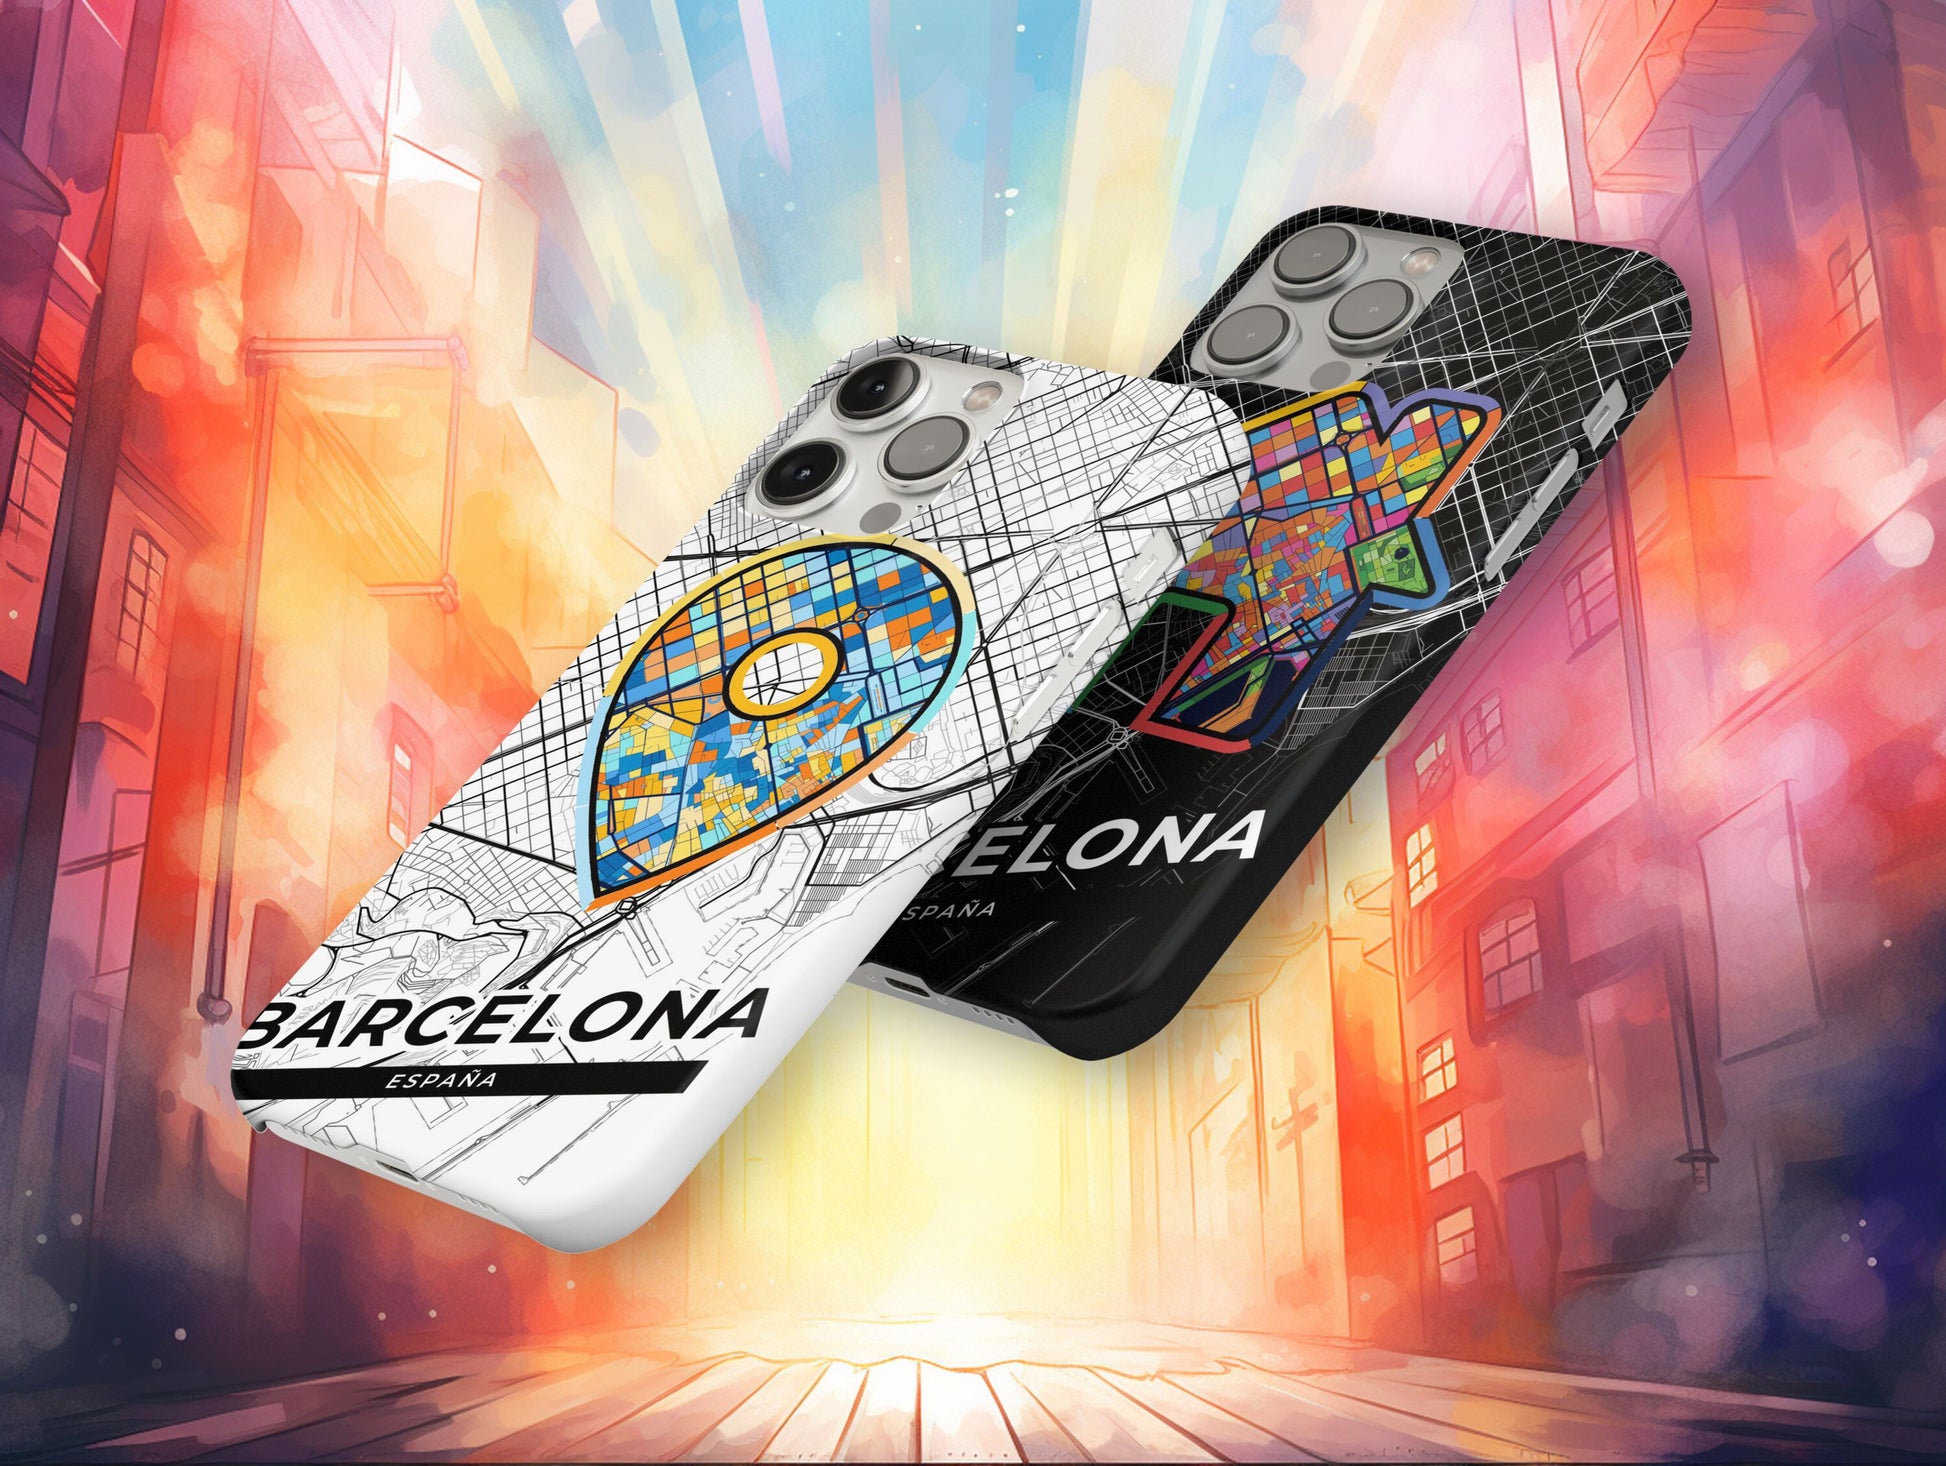 Barcelona Spain slim phone case with colorful icon. Birthday, wedding or housewarming gift. Couple match cases.